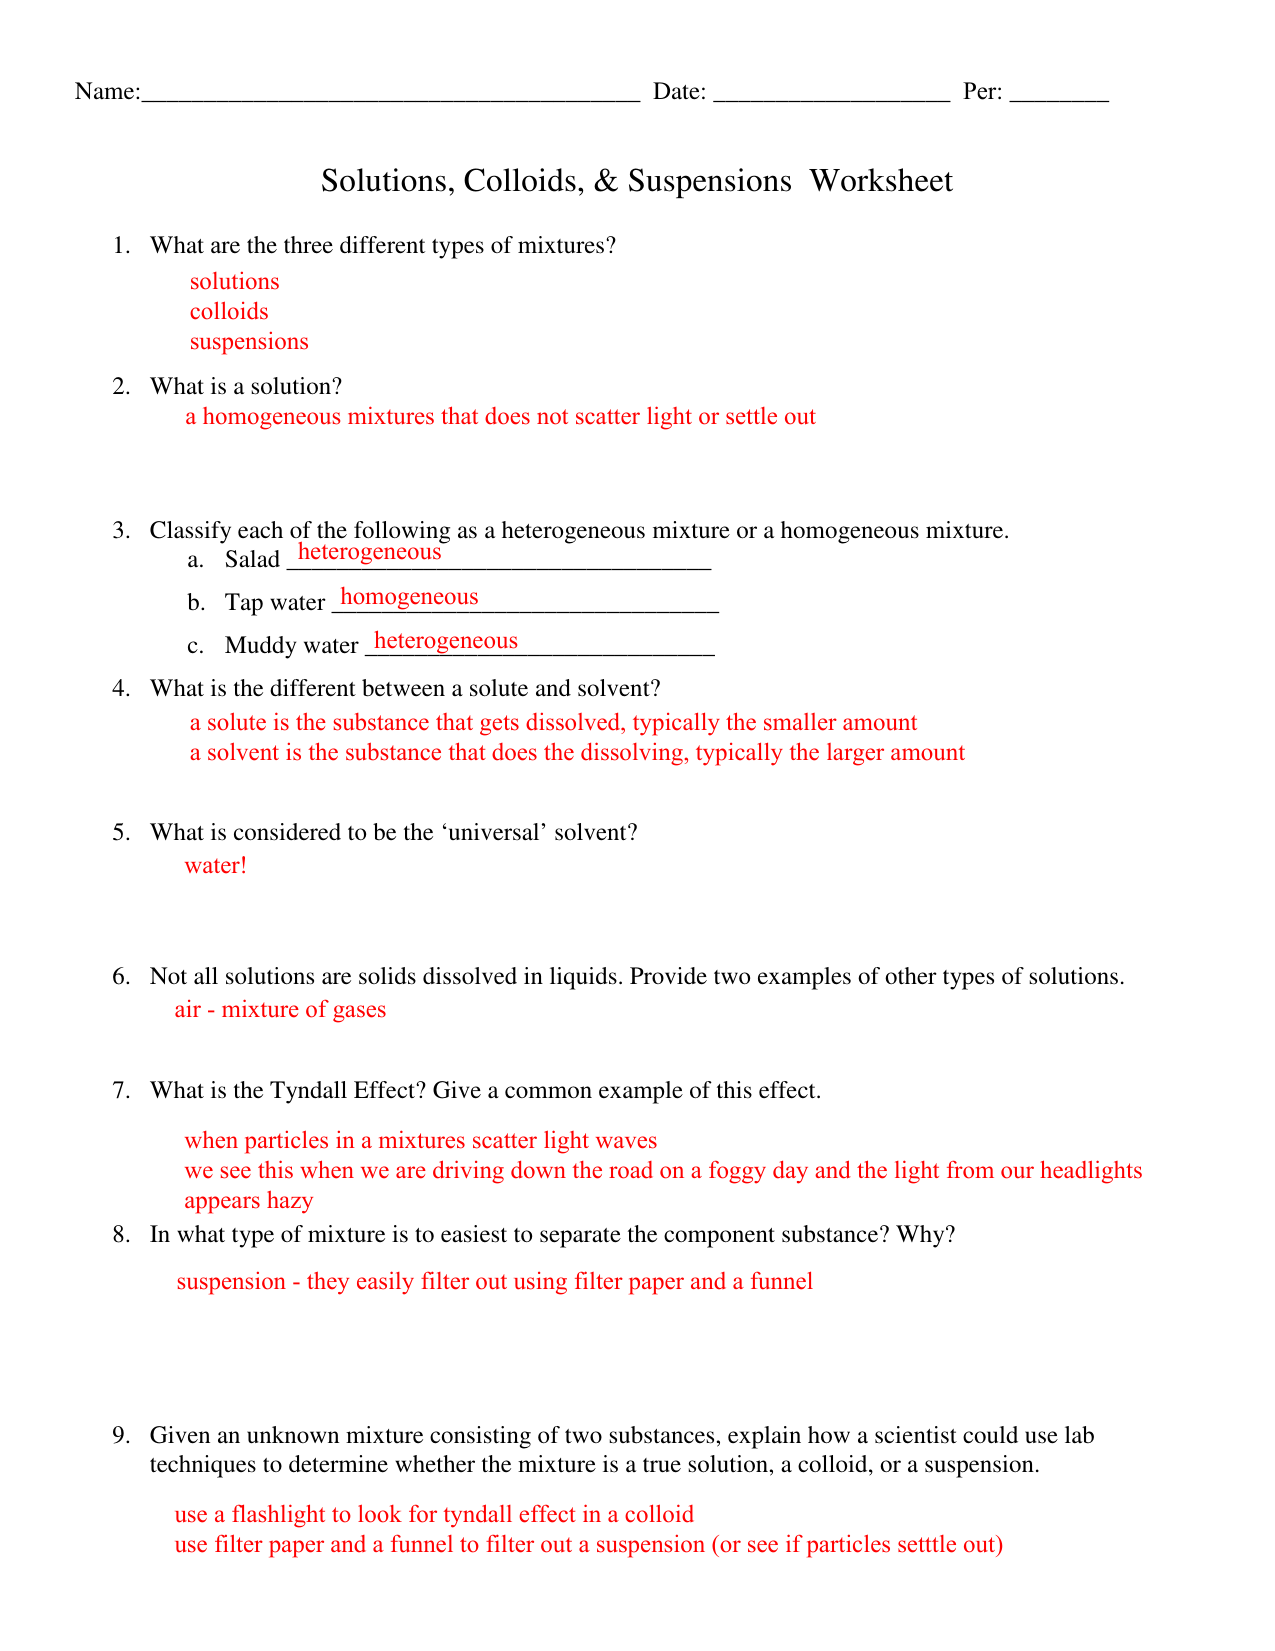 w-soltution colloid suspension key Inside Solutions Colloids And Suspensions Worksheet